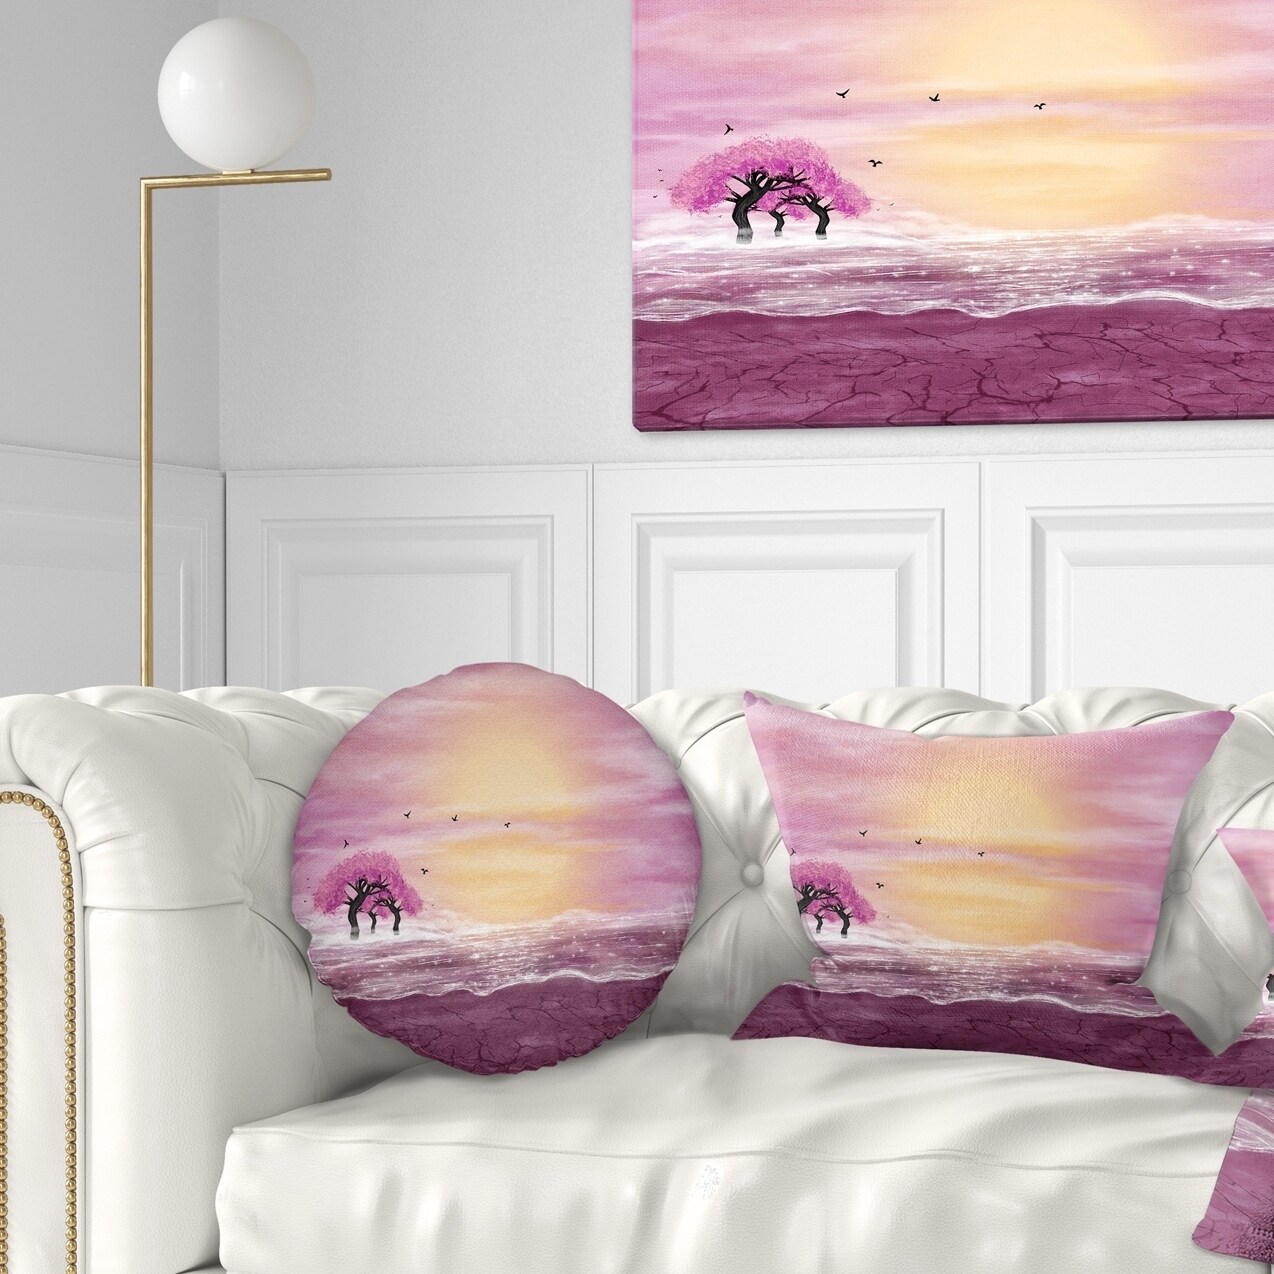 https://ak1.ostkcdn.com/images/products/20946830/Designart-Water-and-Pink-Trees-in-Desert-Landscape-Printed-Throw-Pillow-4cd5fea3-41a4-495c-9eb0-4aa2c2ccf324.jpg